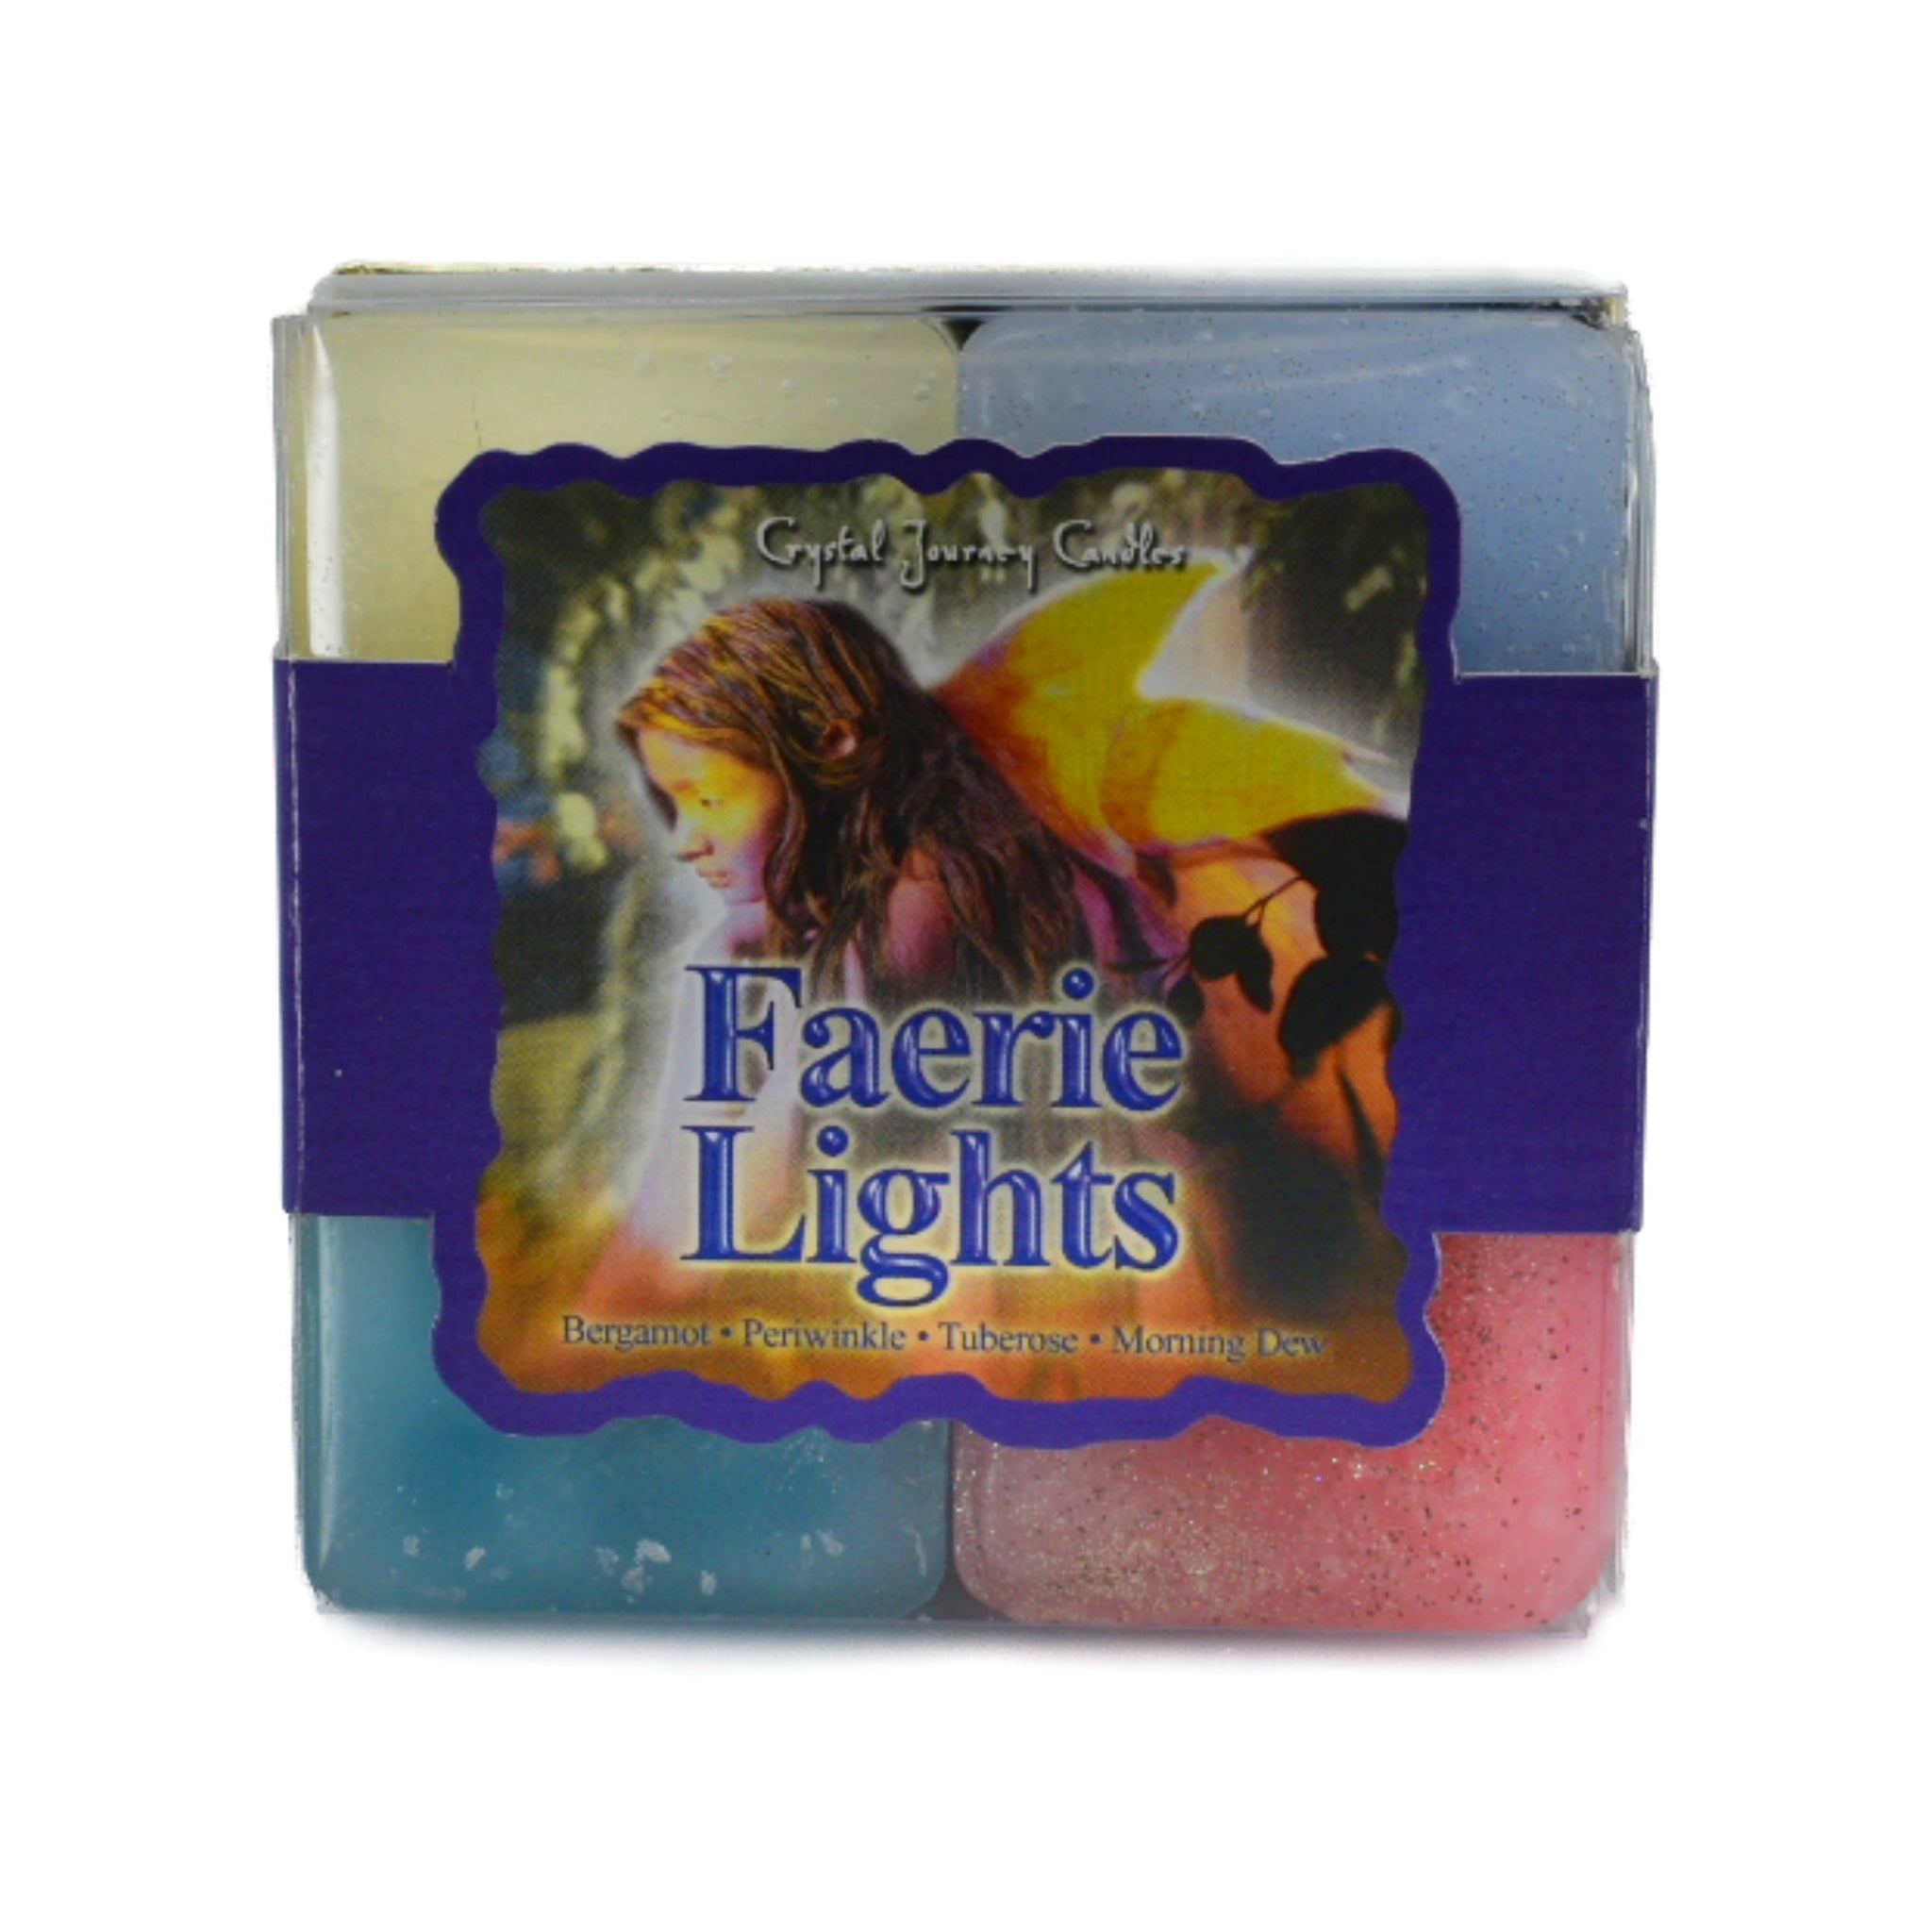 Faerie Lights Square Pack Candle.  A four pack candles with Bergamot, Tuberose, Morning Dew and Periwinkle to bring in the scent of the faerie world.